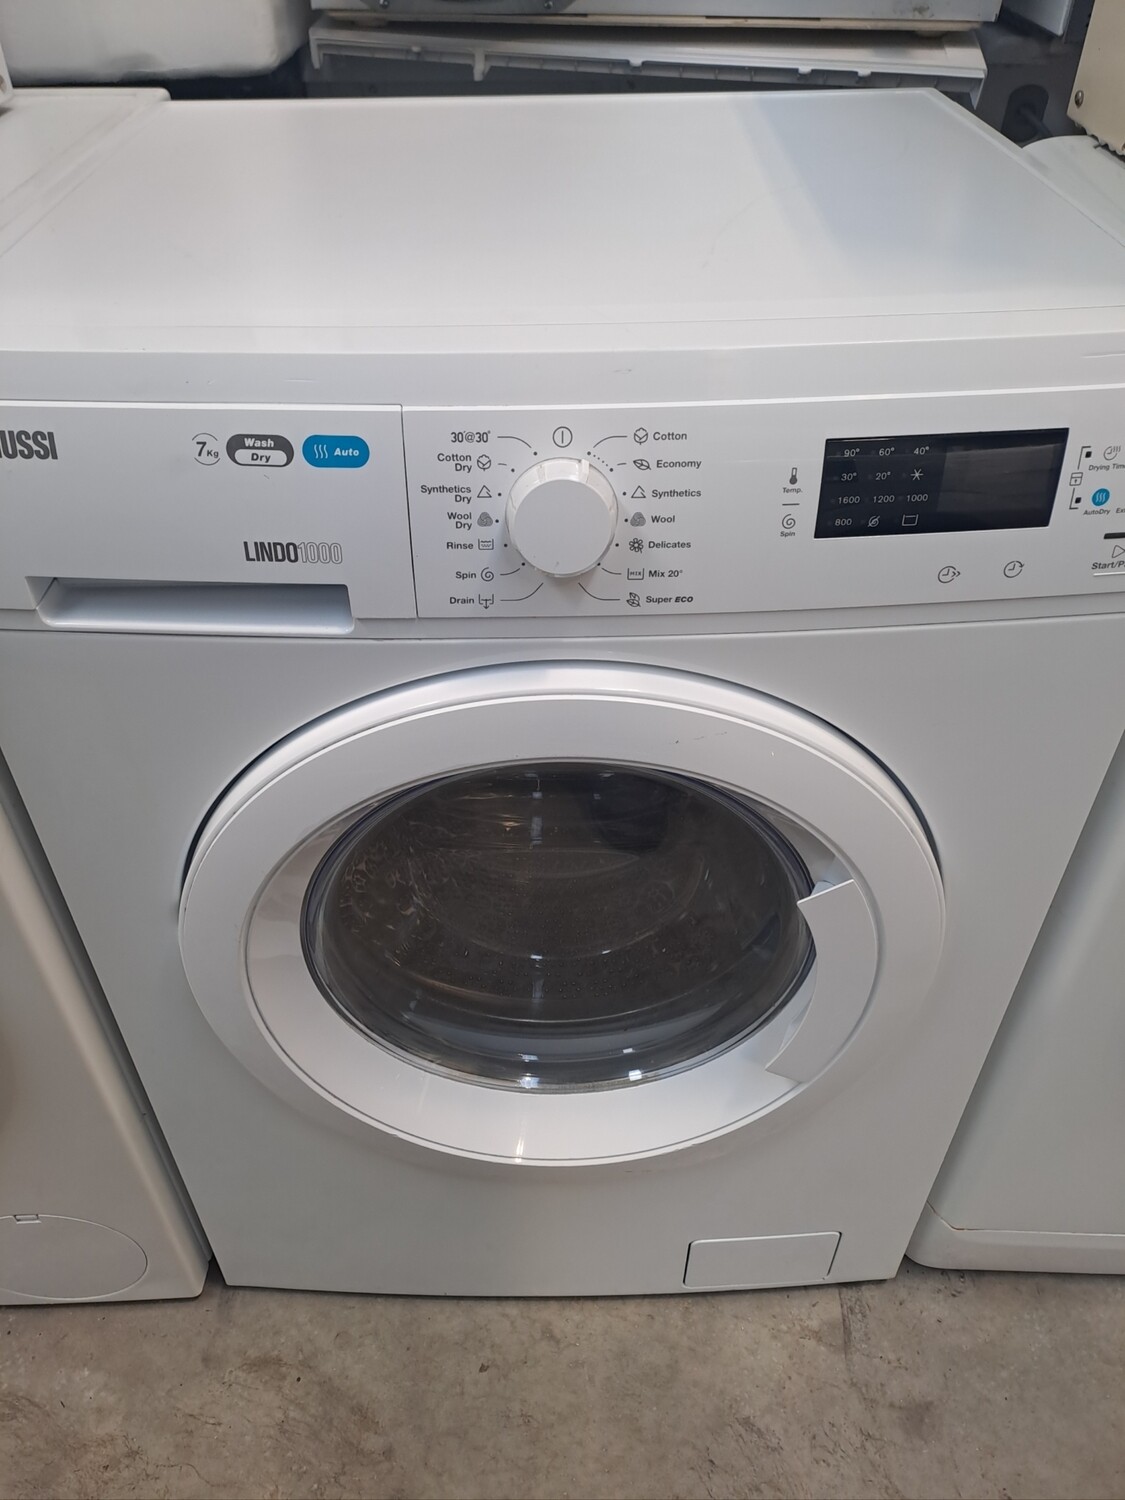 Zanussi ZWD71663NW 7kg Load 1600 Spin Washer Dryer - White - Refurbished - 6 Month Guarantee. This item is located in our Whitby Road Shop 